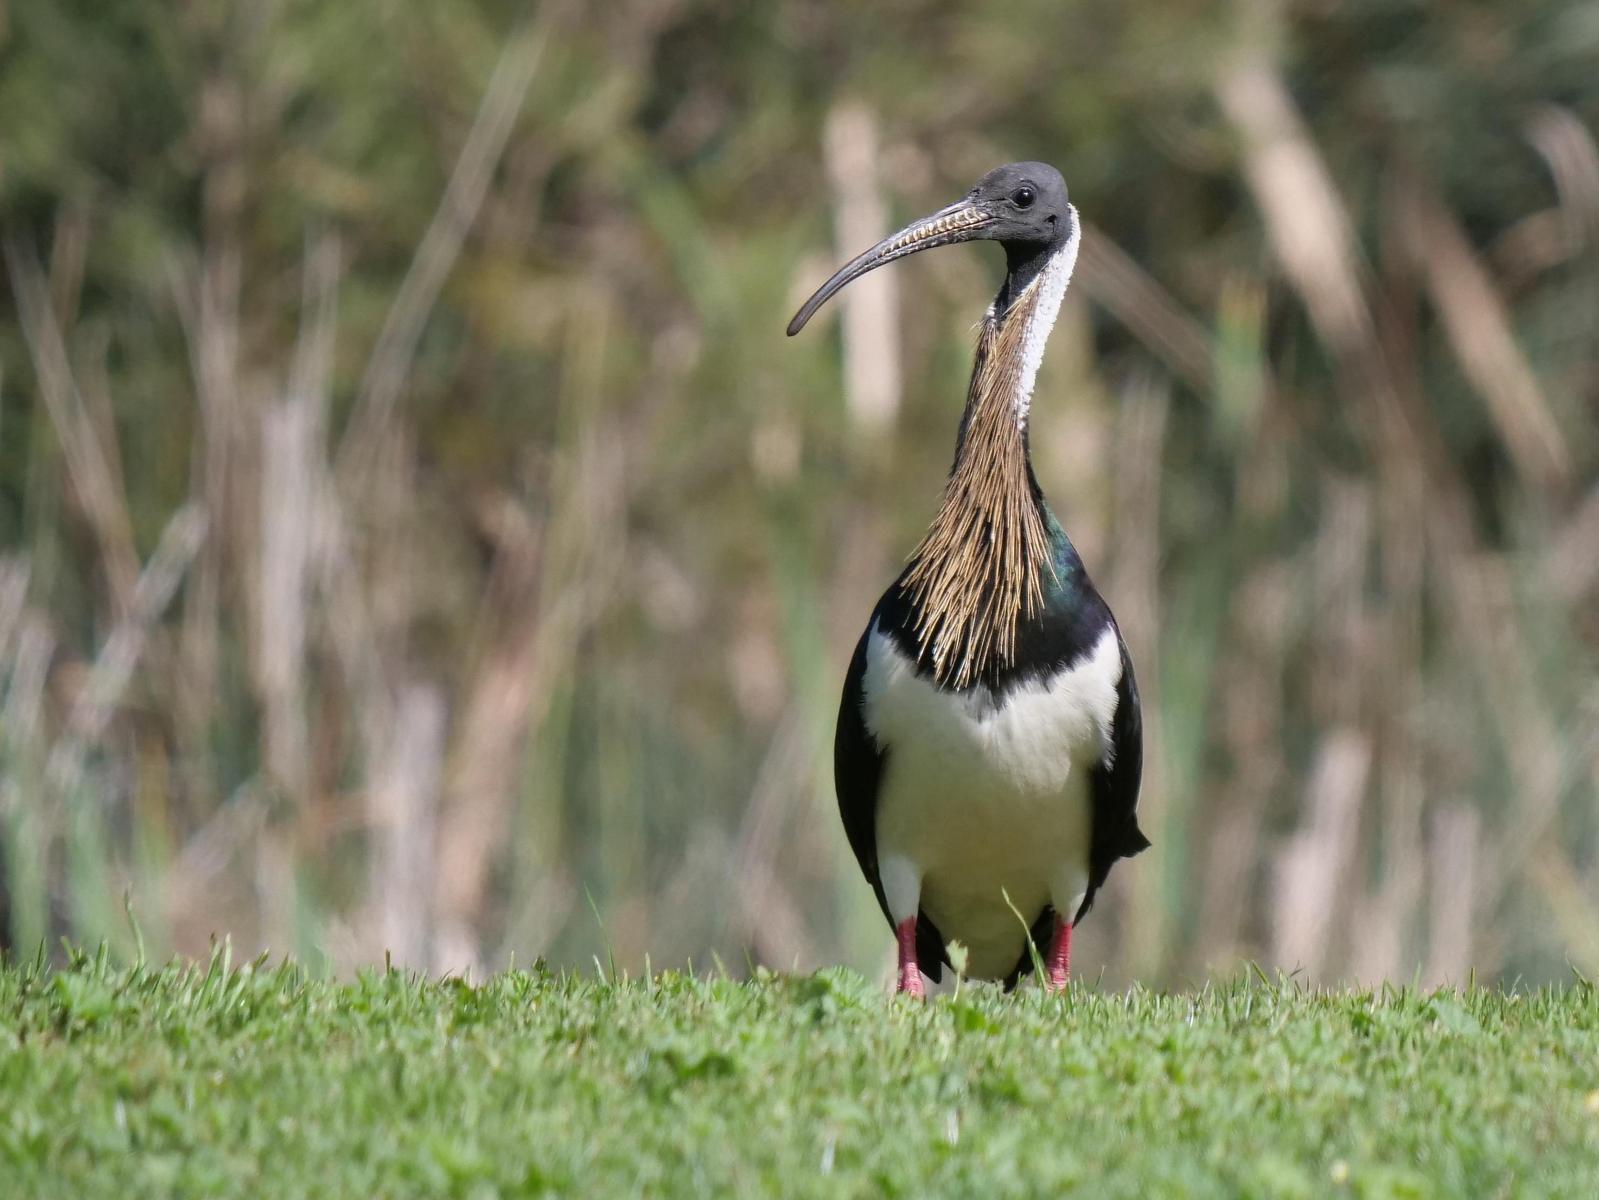 Straw-necked Ibis Photo by Peter Lowe